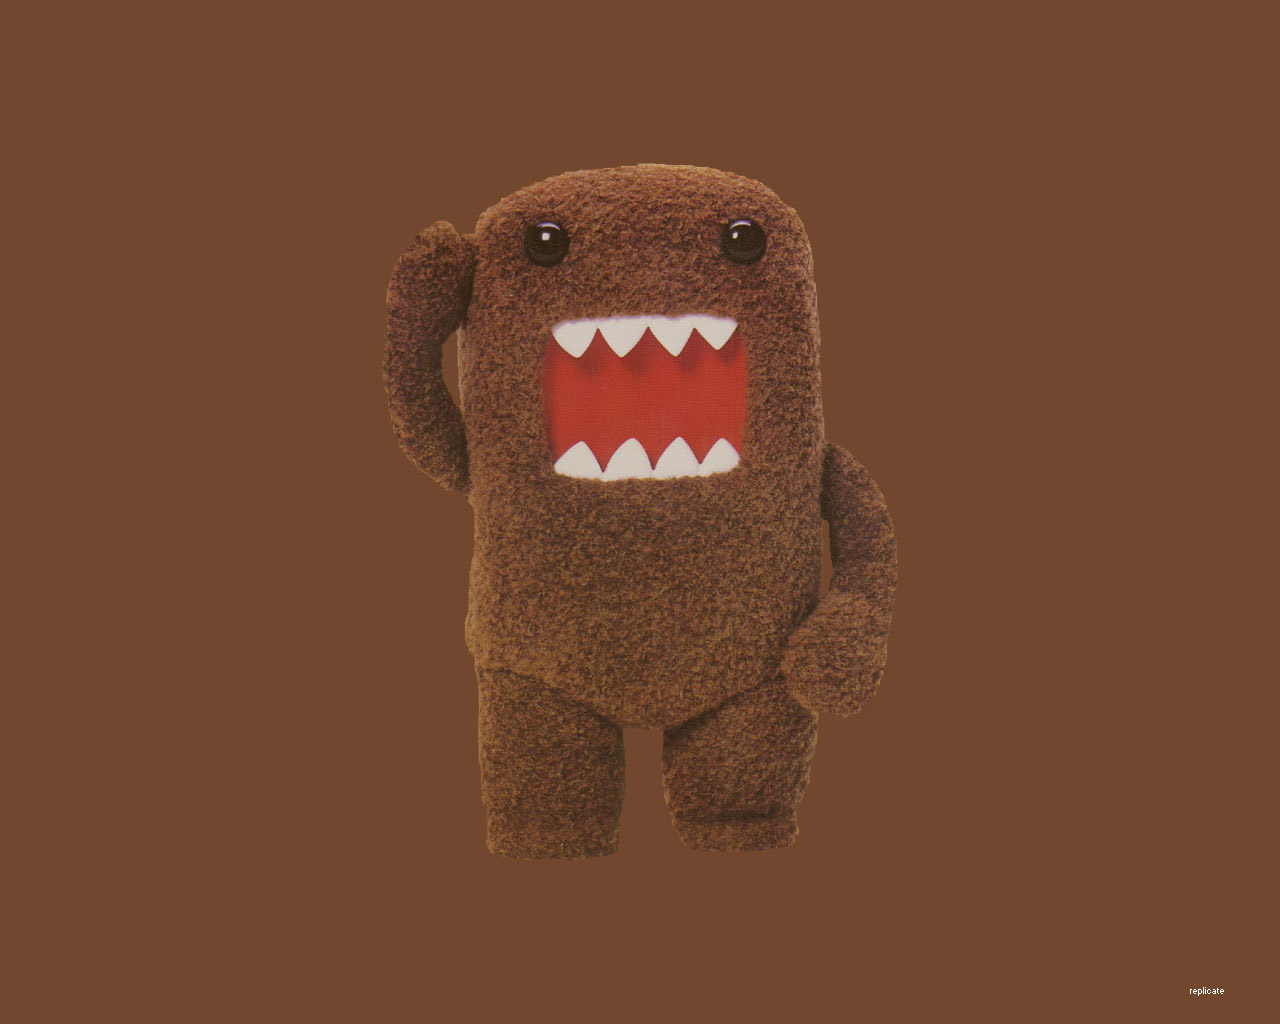 Are Ing Domo HD Wallpaper Color Palette Tags Category General